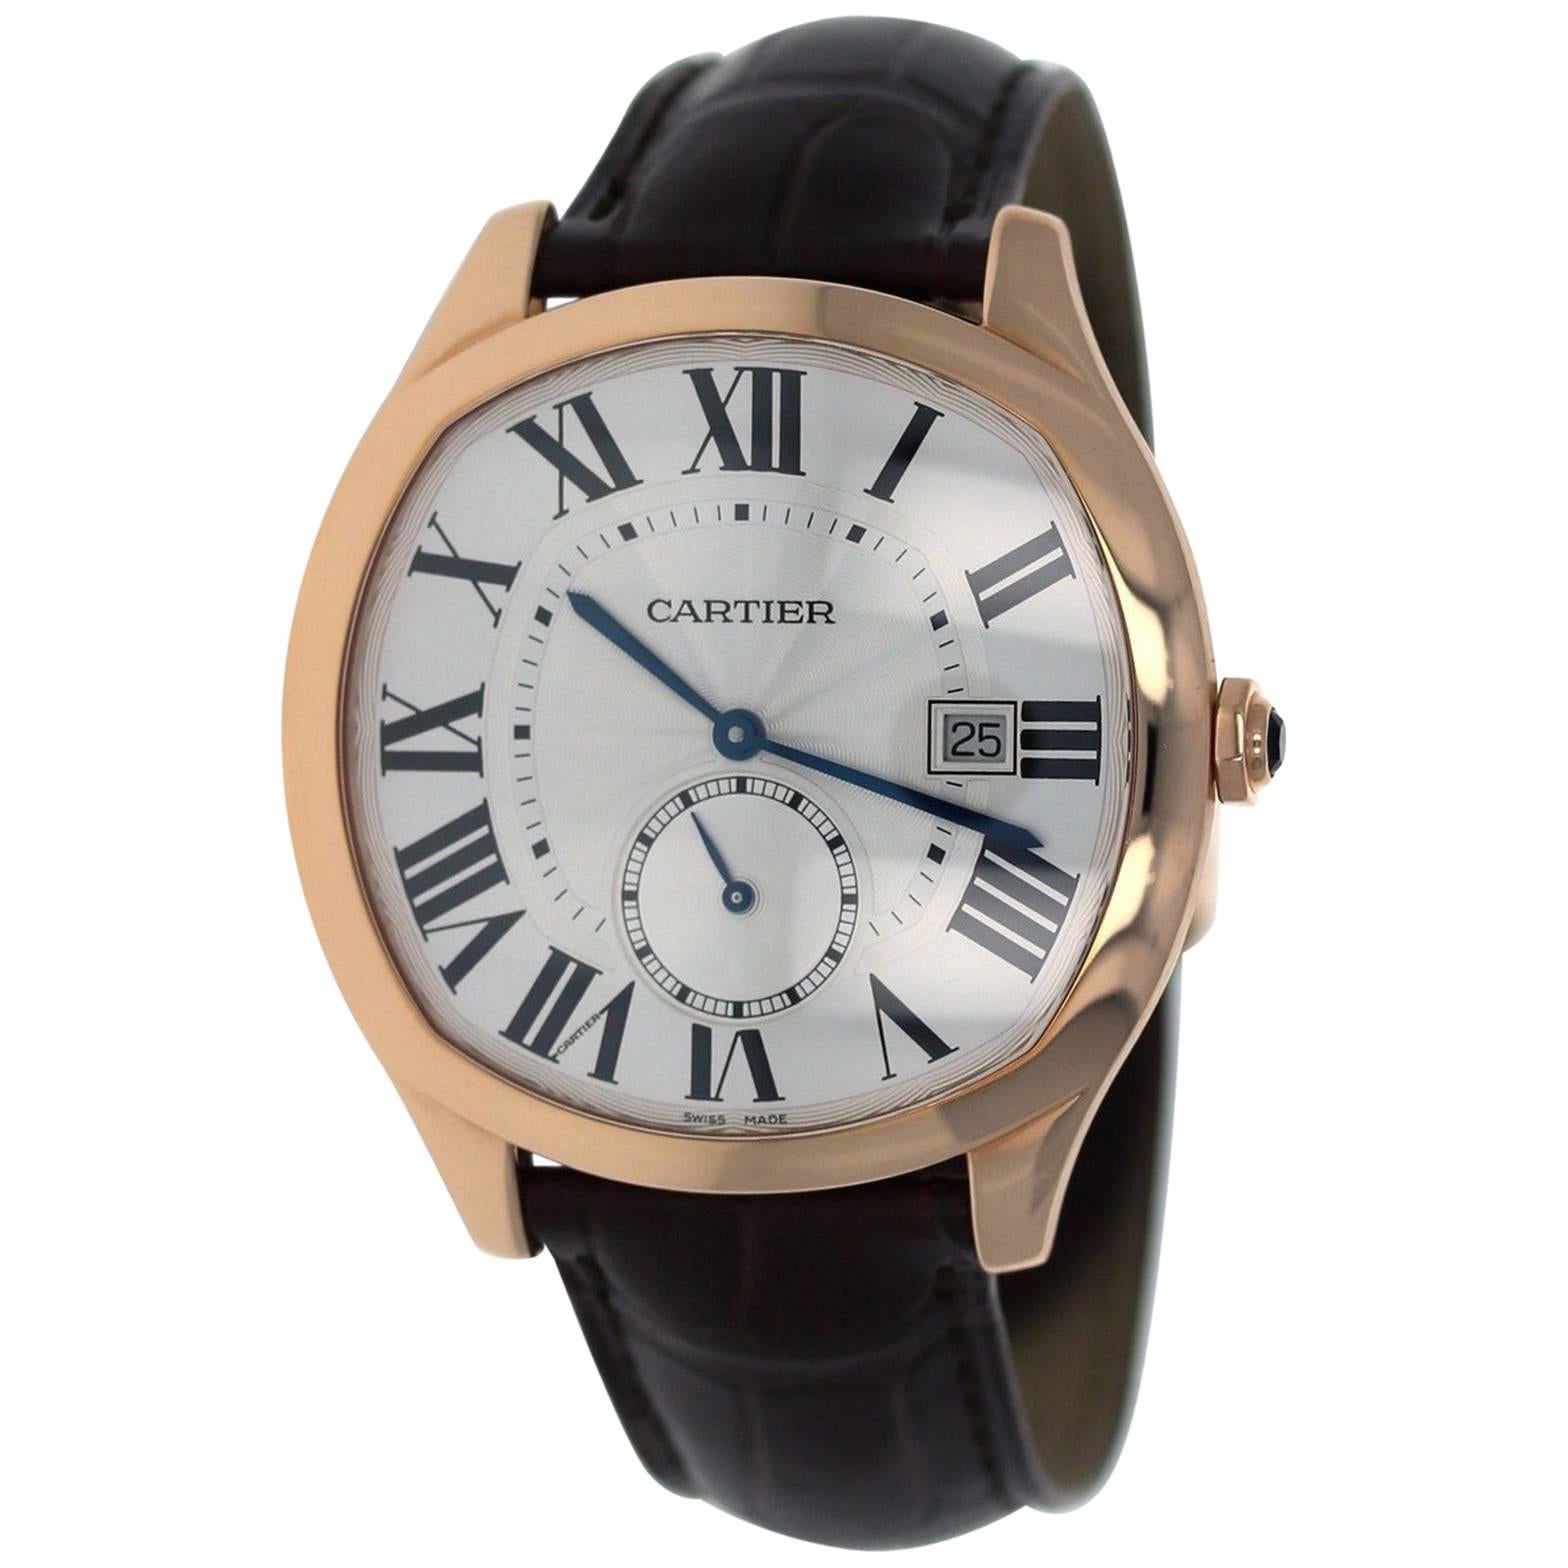 Brand Name:  Cartier 
Style Number:  WGNM0003 
Series:  Drive de Cartier 
Gender:  Men's 
Case Material:  18k Rose Gold  
Dial Color:  Silver w/ guilloche Finishings 
Movement:  Automatic 
Engine:  Cal. 1904-PS MC 
Functions:  Hours, Minutes,